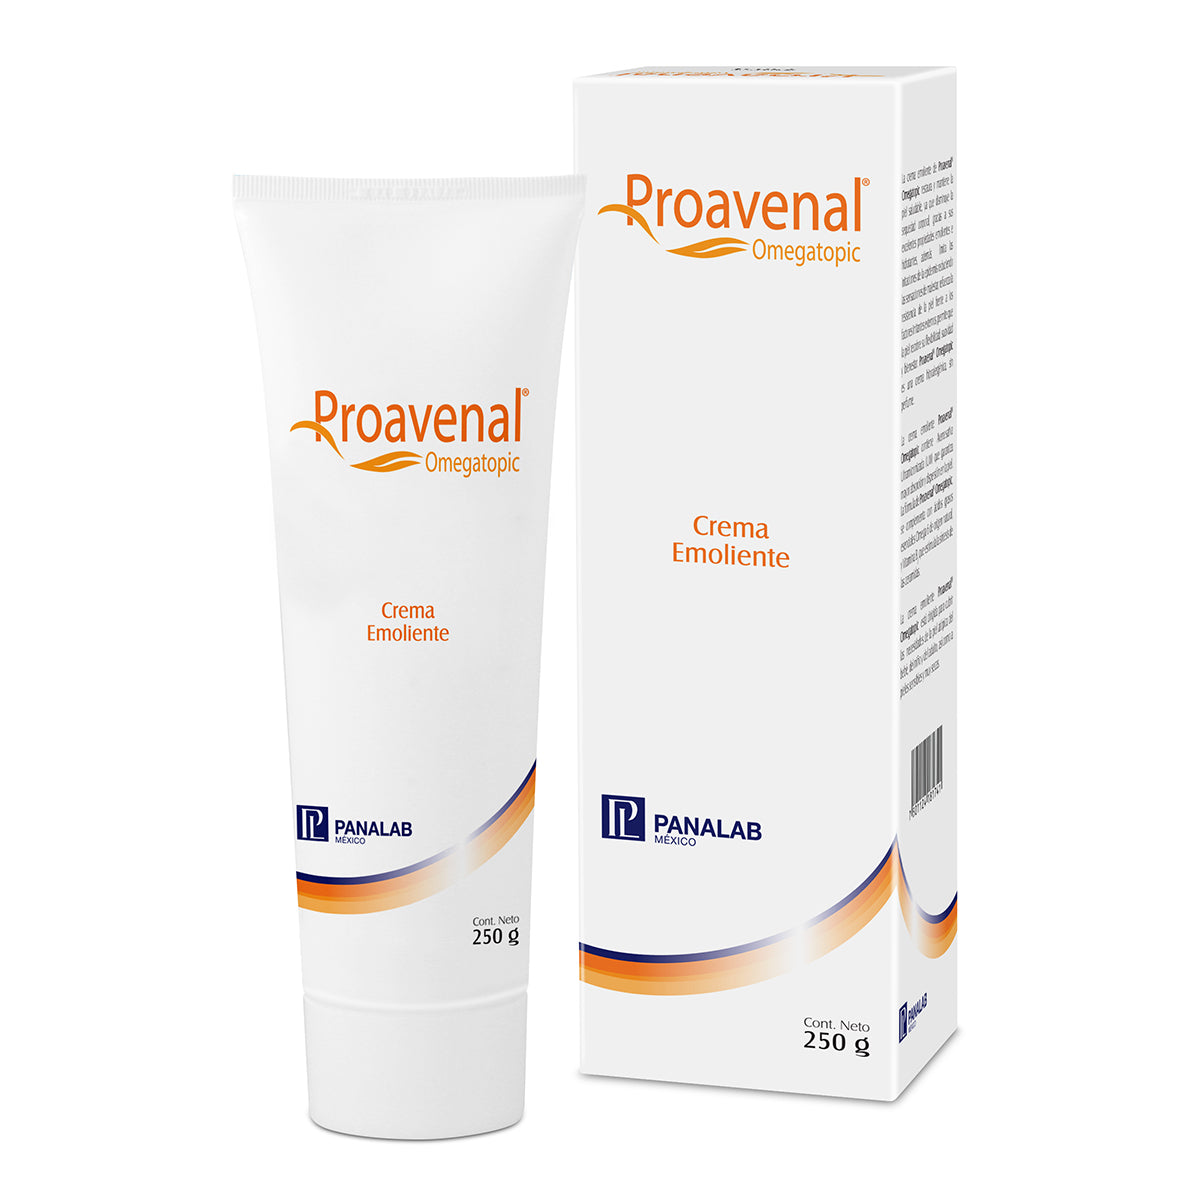 PROAVENAL OMEGATOPIC CREMA 250 G | The Glow Shop